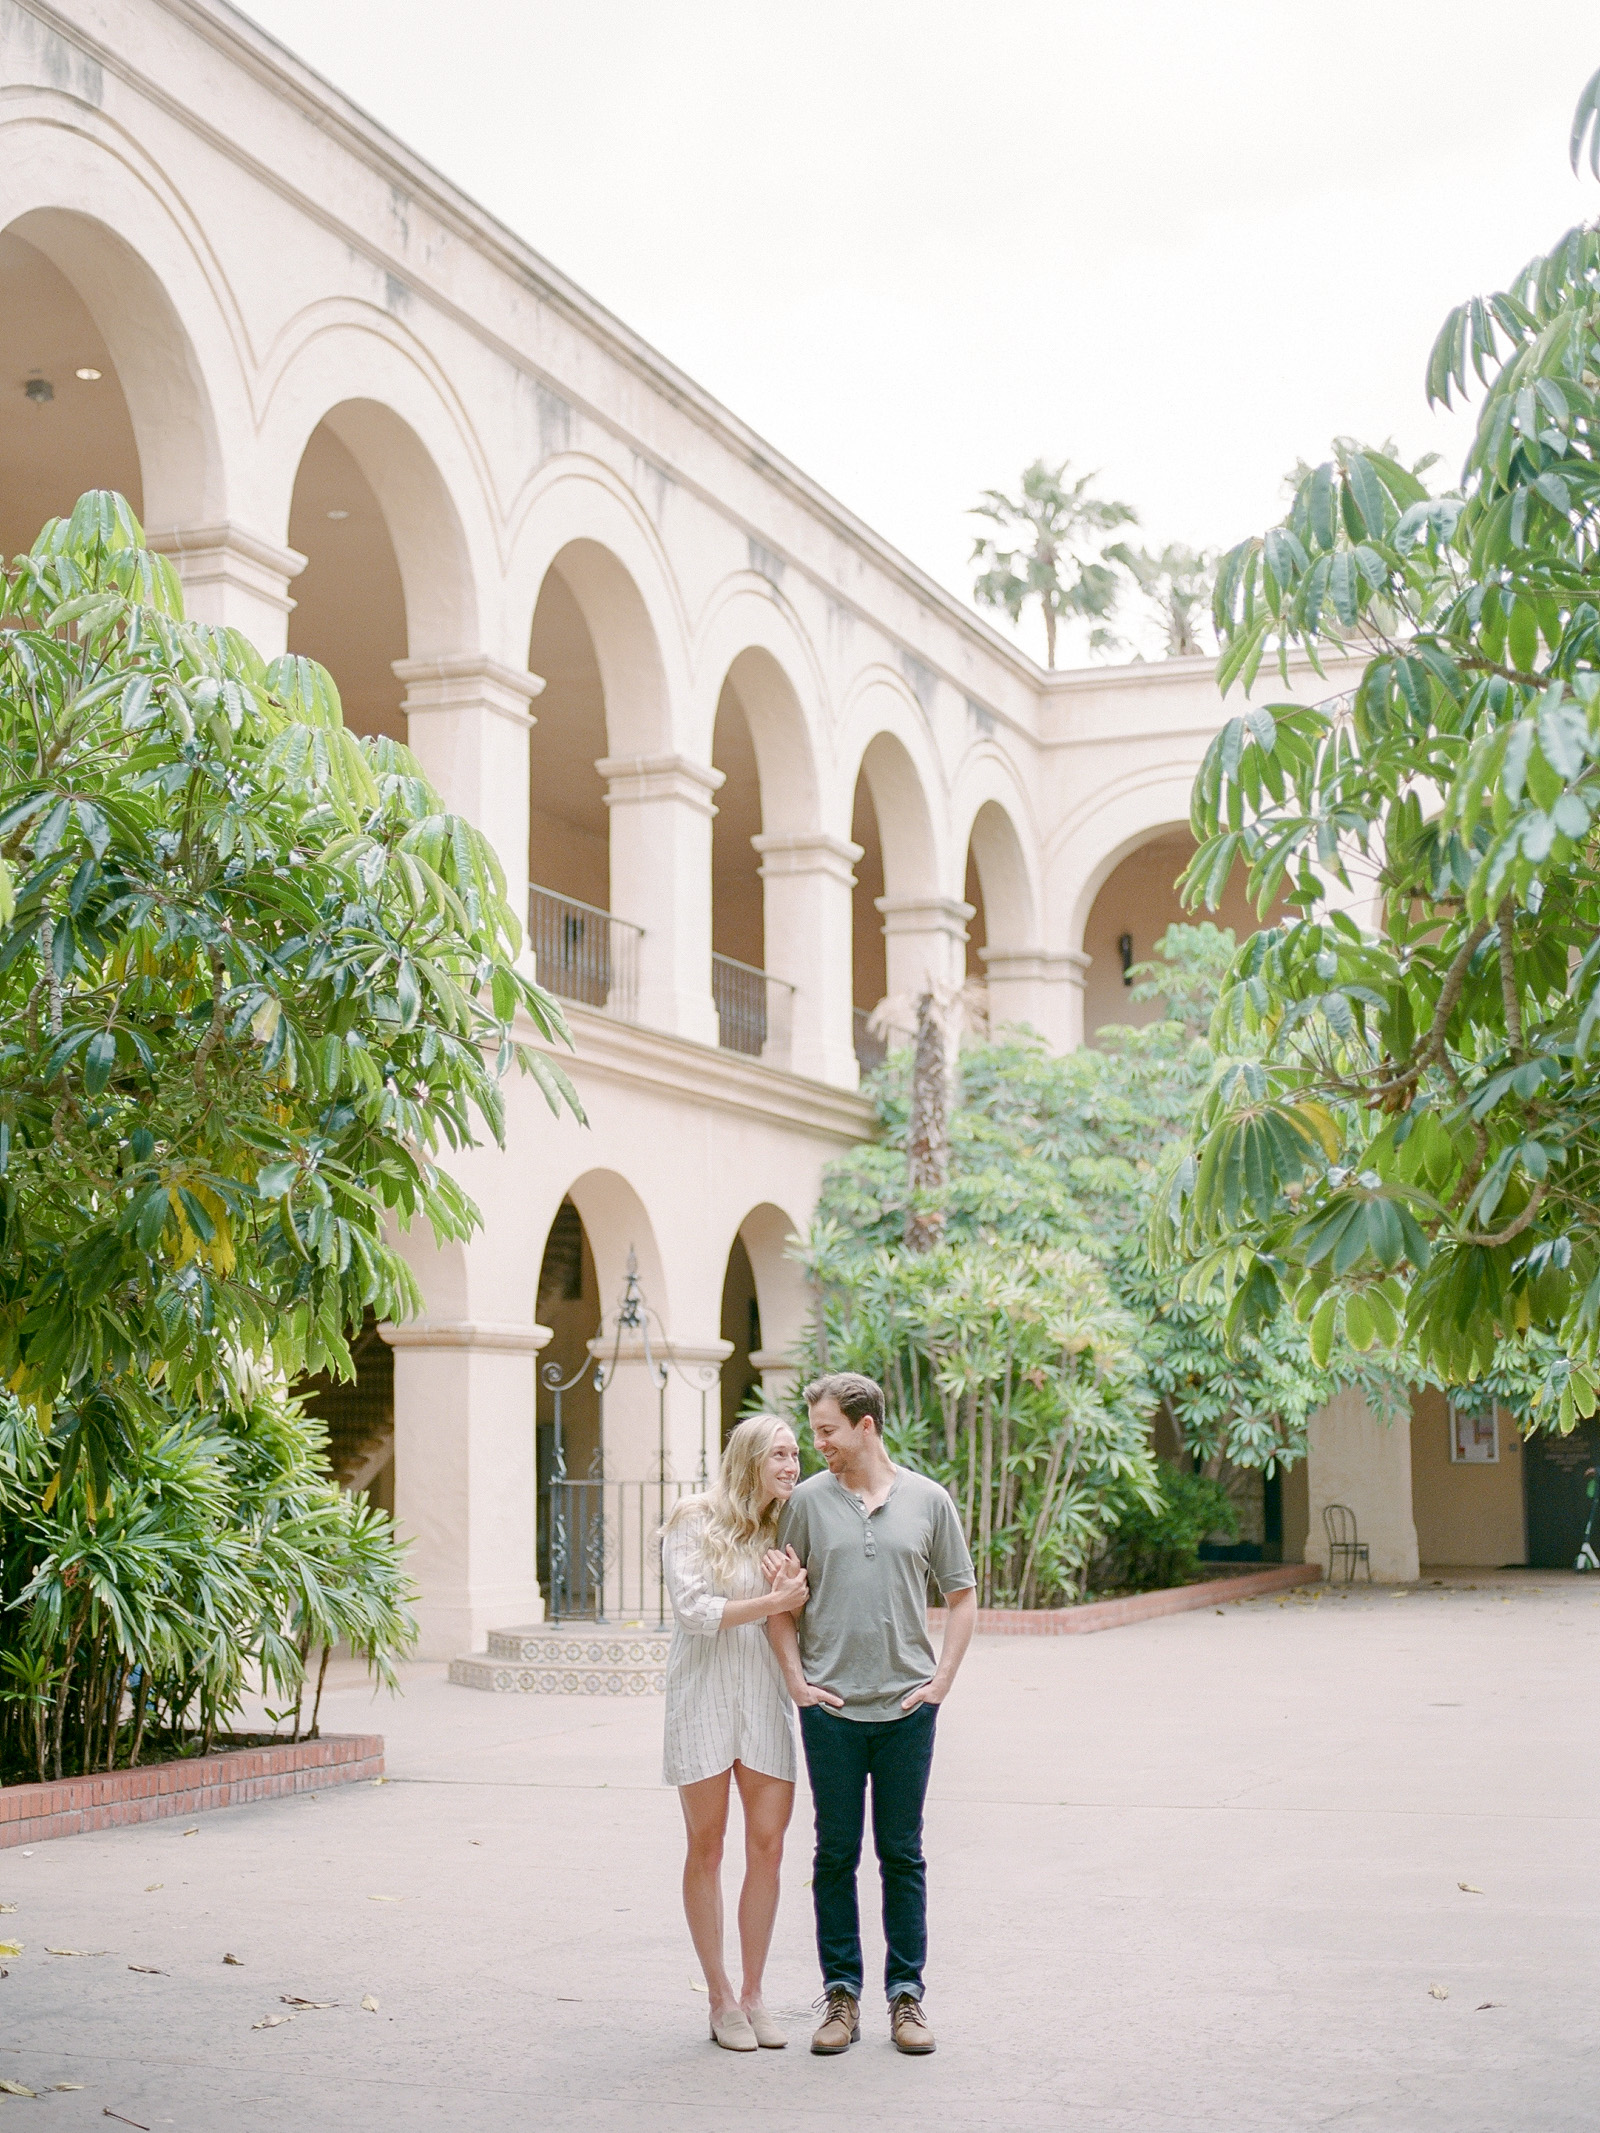 Balboa Park Engagement Session in San Diego - Kerry Jeanne film Photography (18)